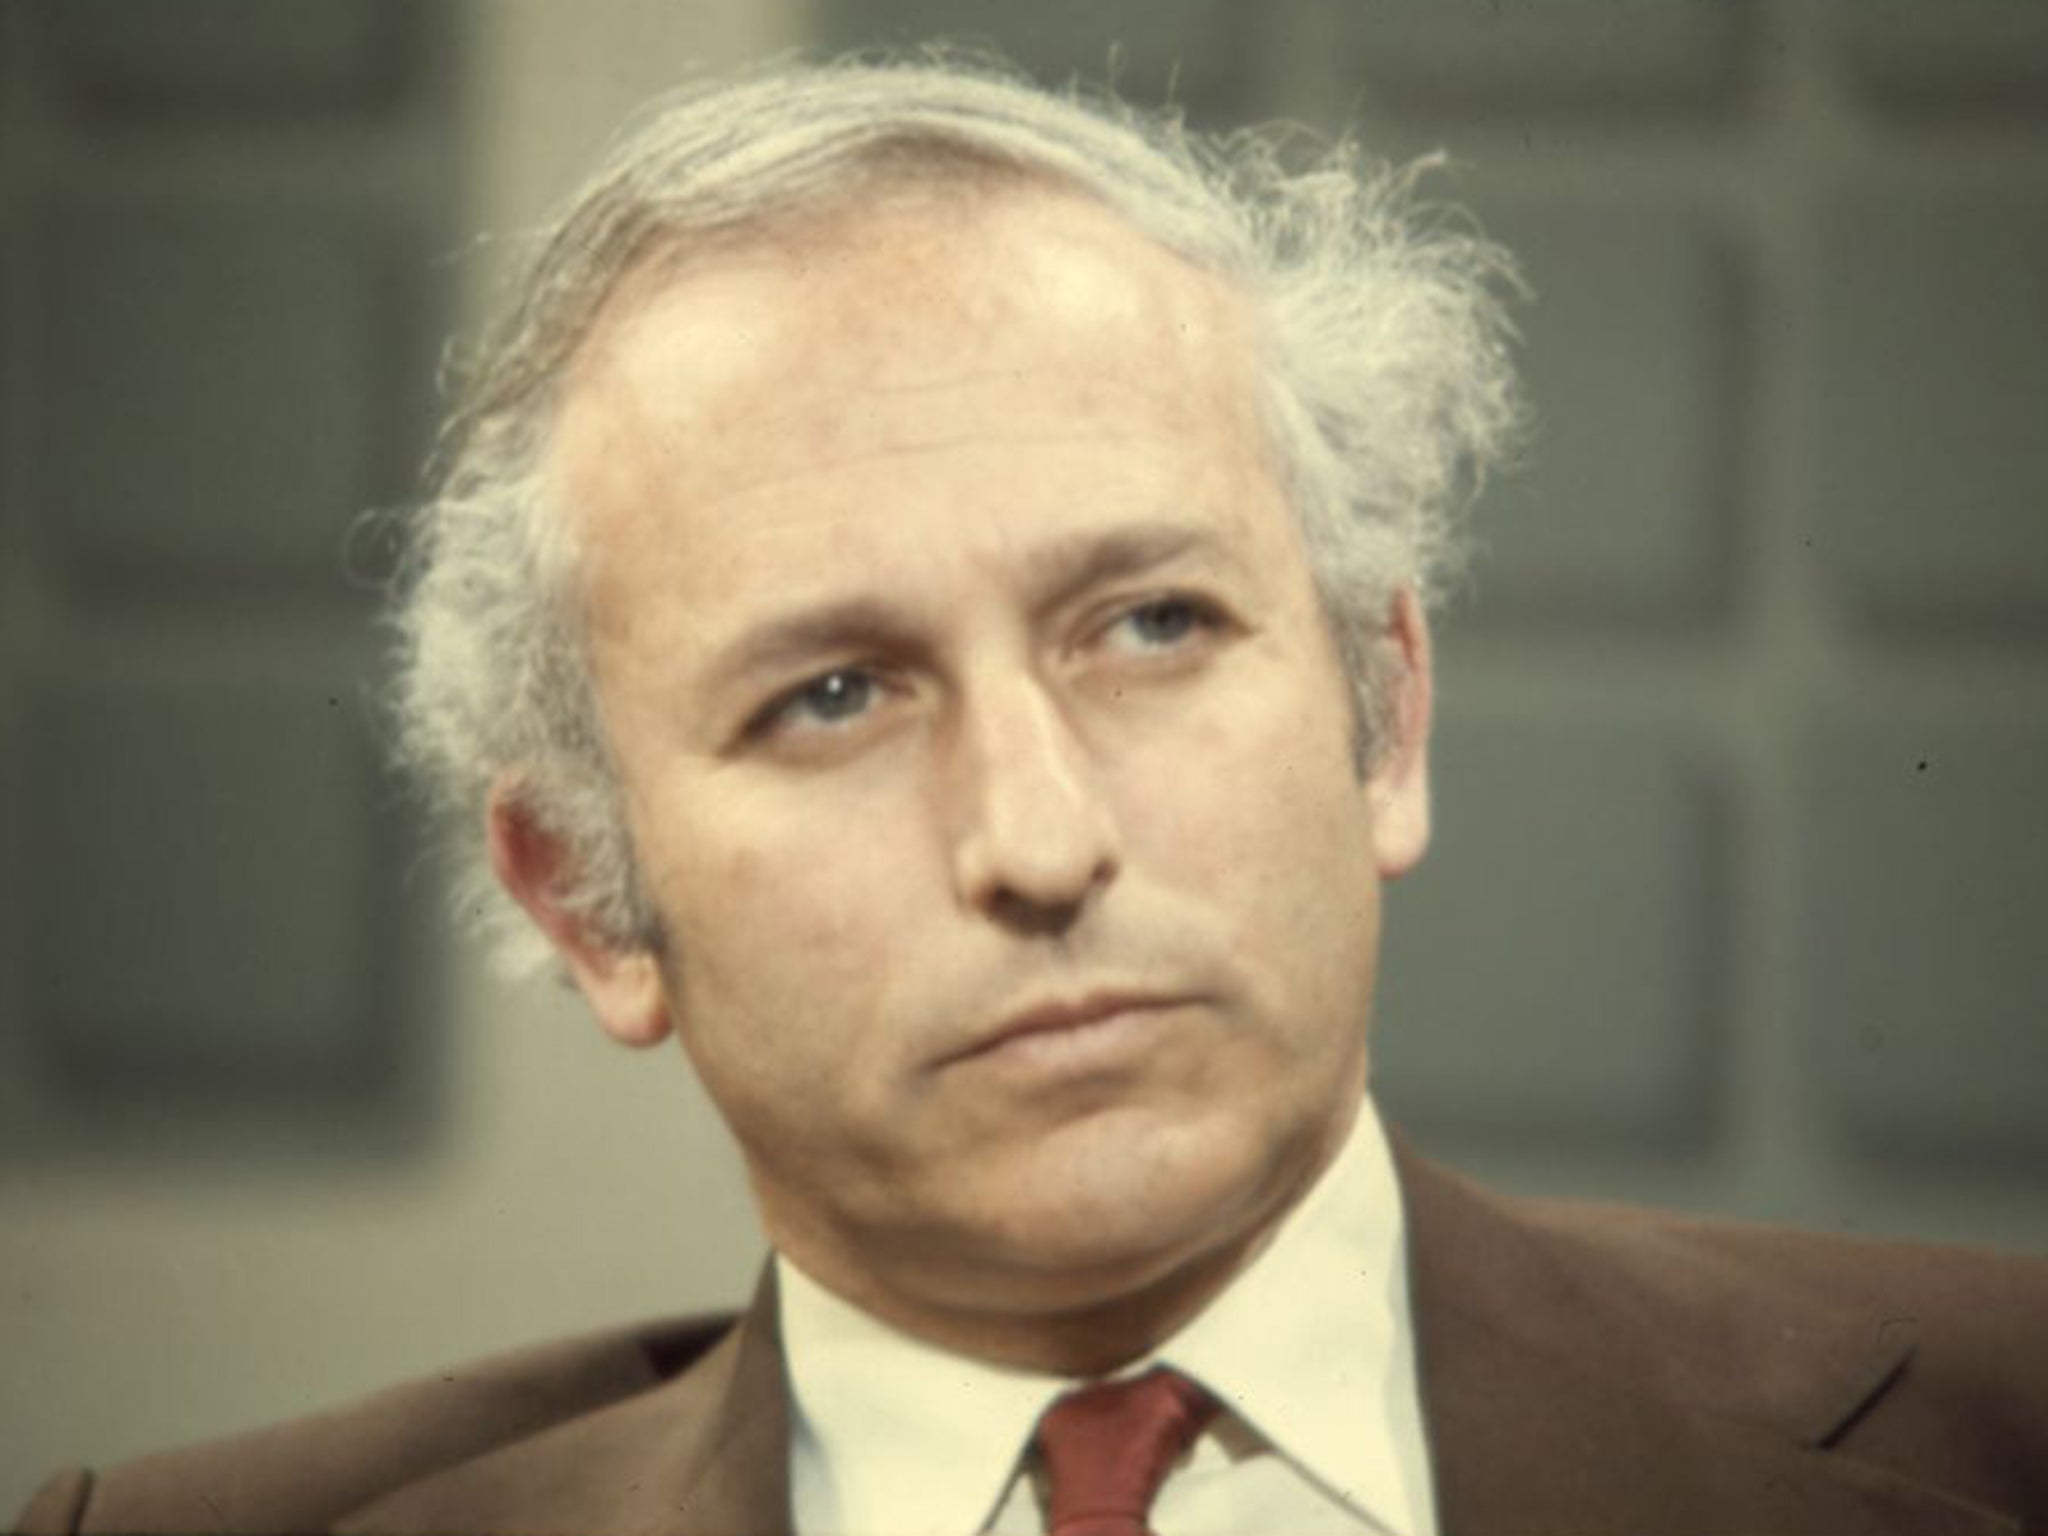 The case against Lord Janner should be heard by a jury to allow him the right to a defence and his alleged victims the chance to be heard also